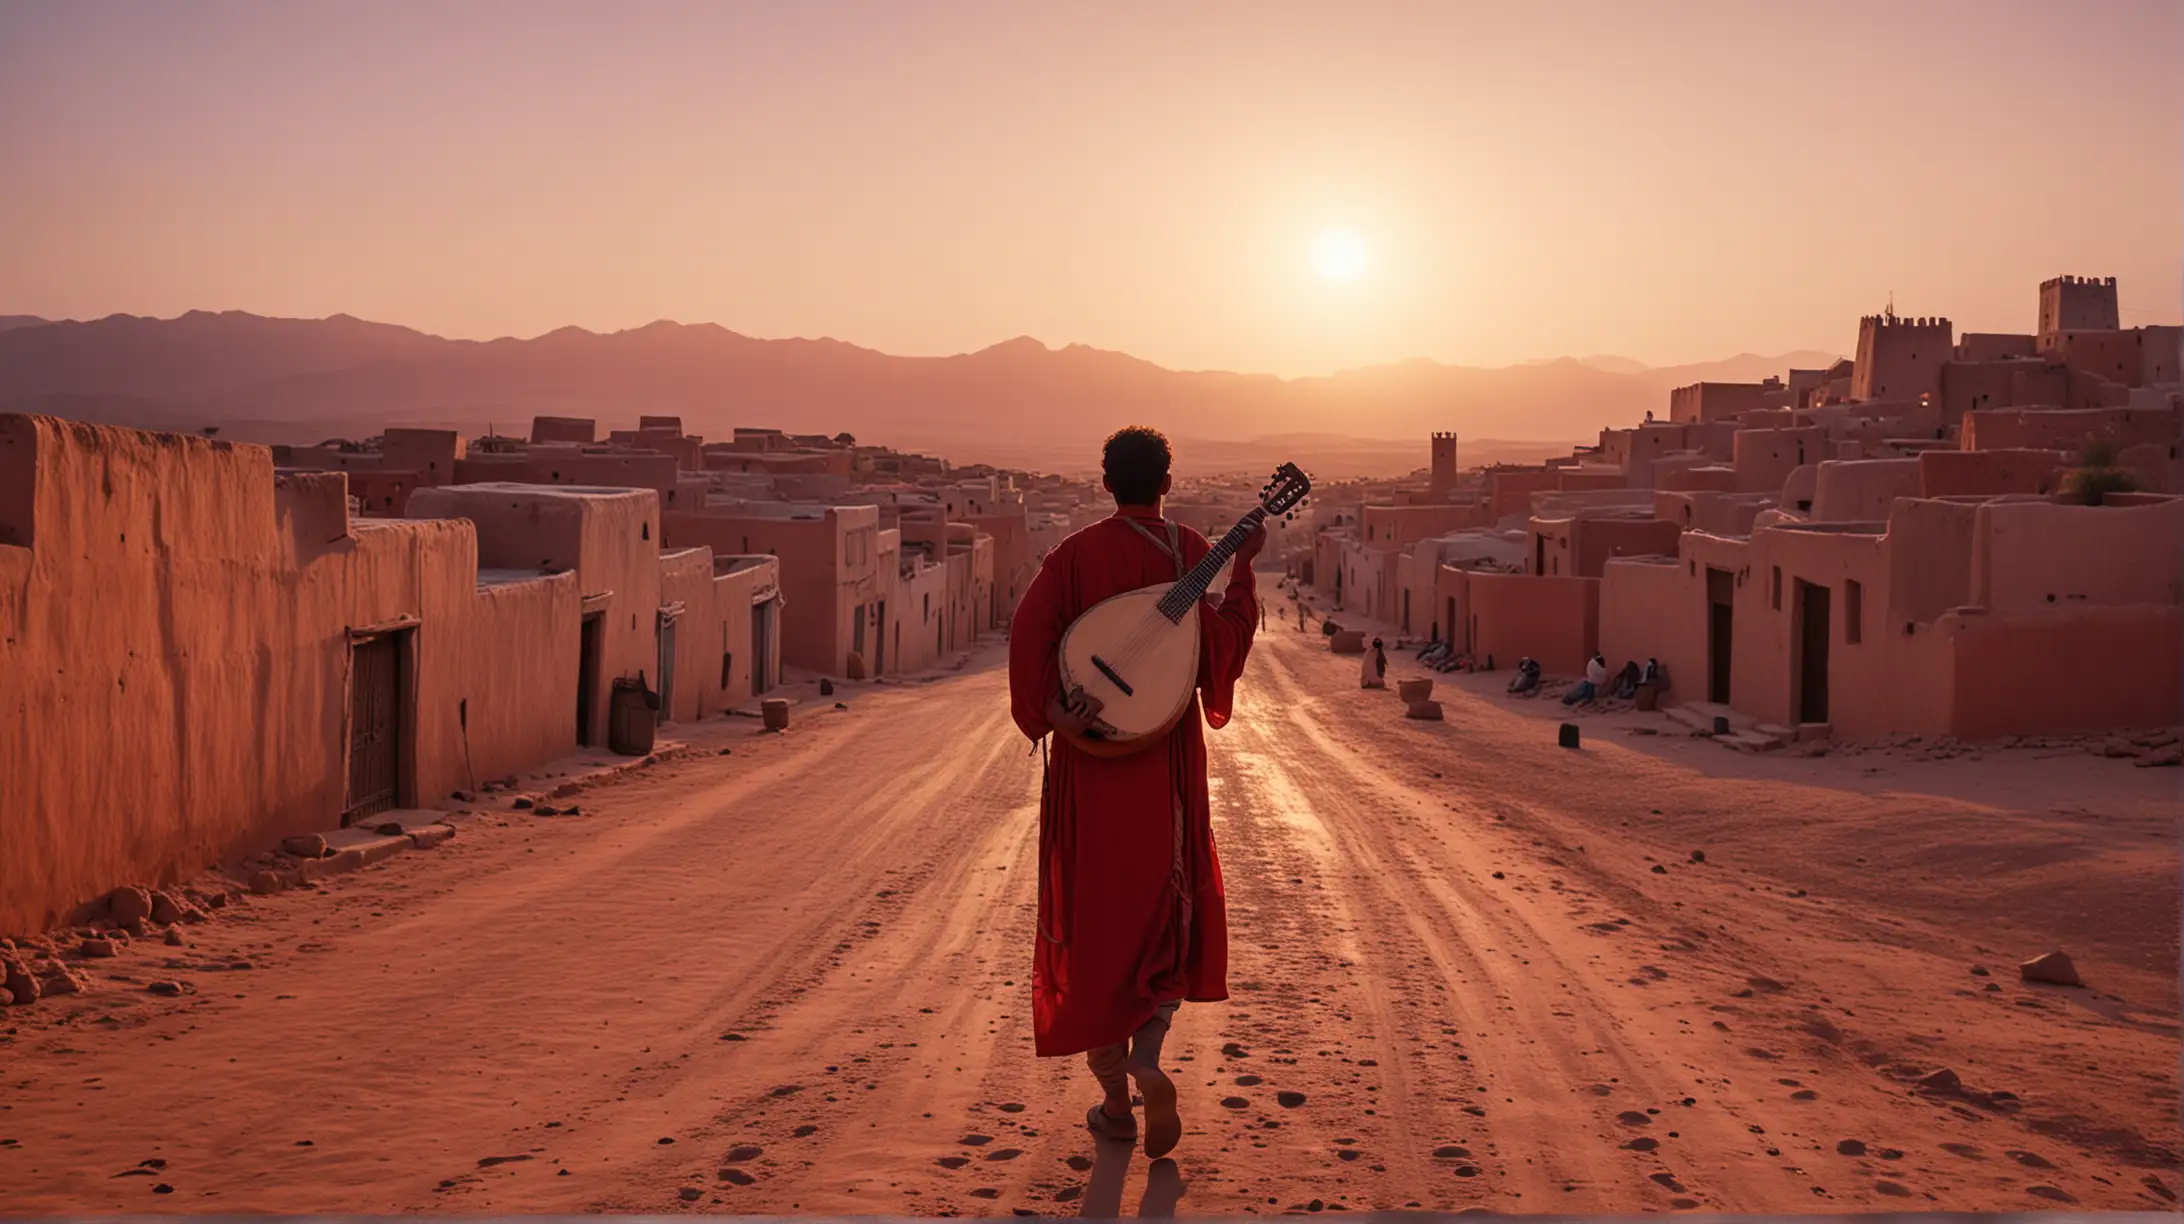 Lonely Moroccan Musician with Lute Entering Traditional Village at Sunset